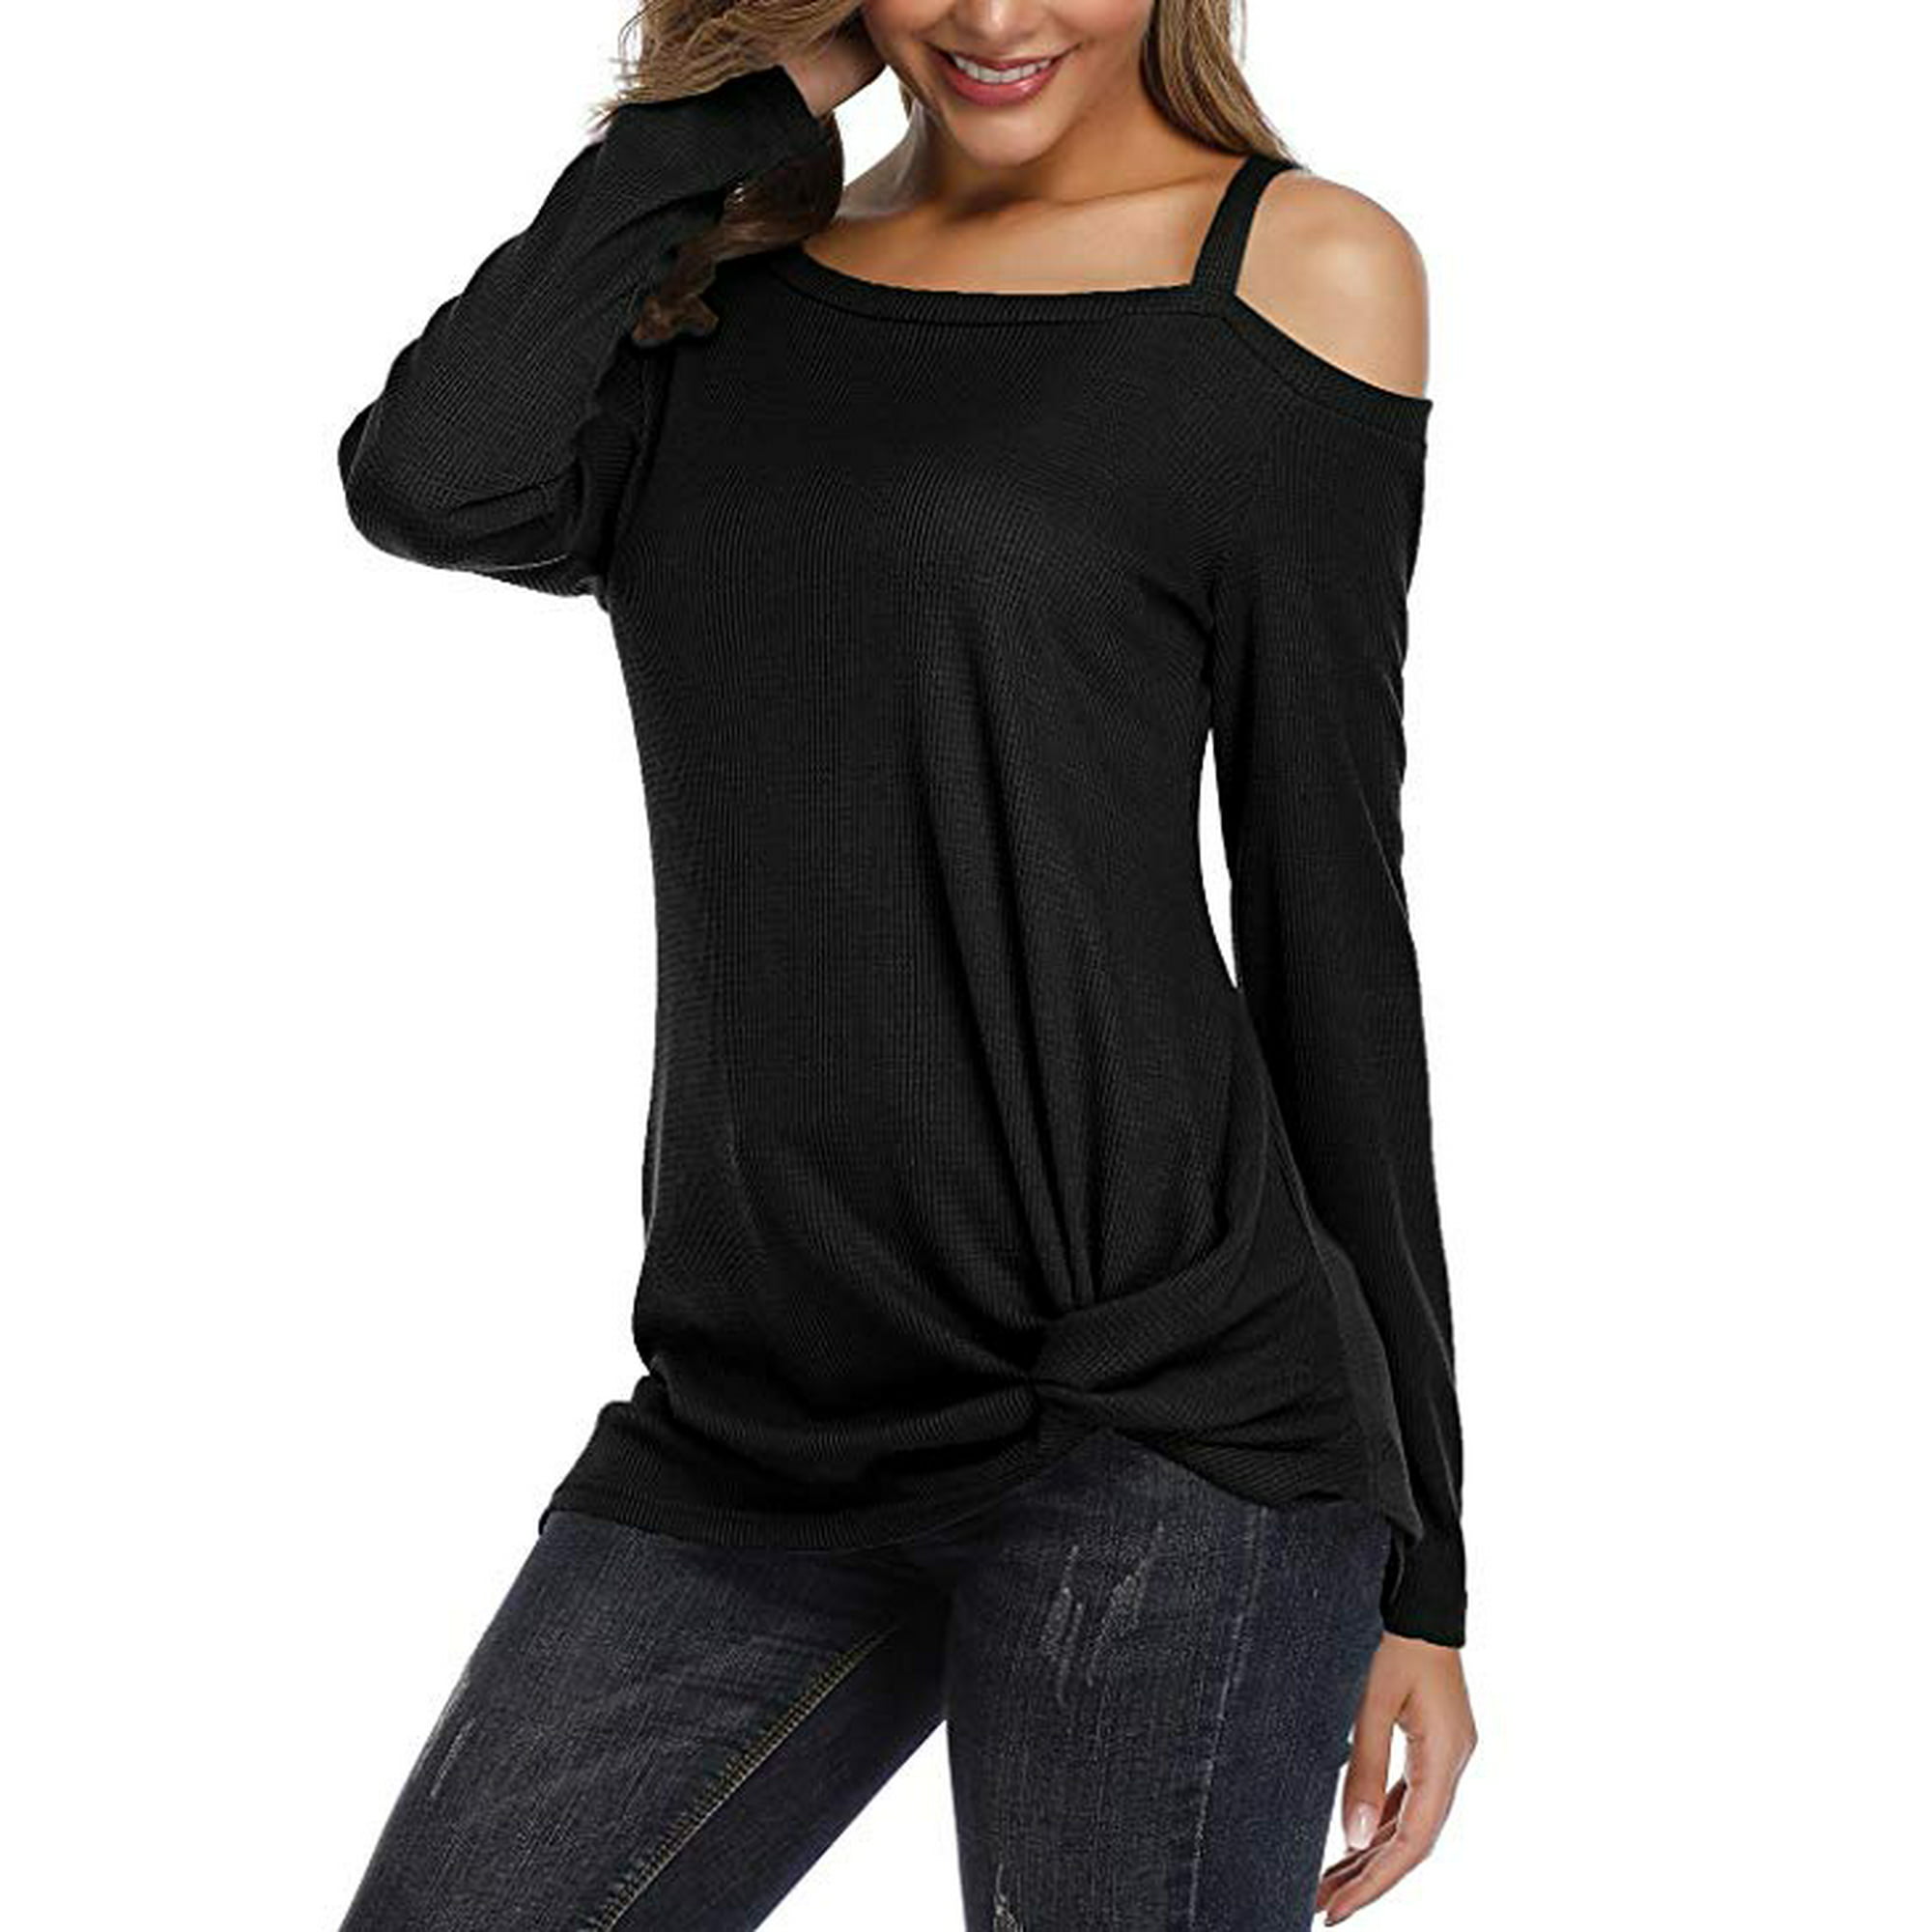 AELSON Women's Cold Shoulder Long Sleeve Shirts Front Twist Knot 